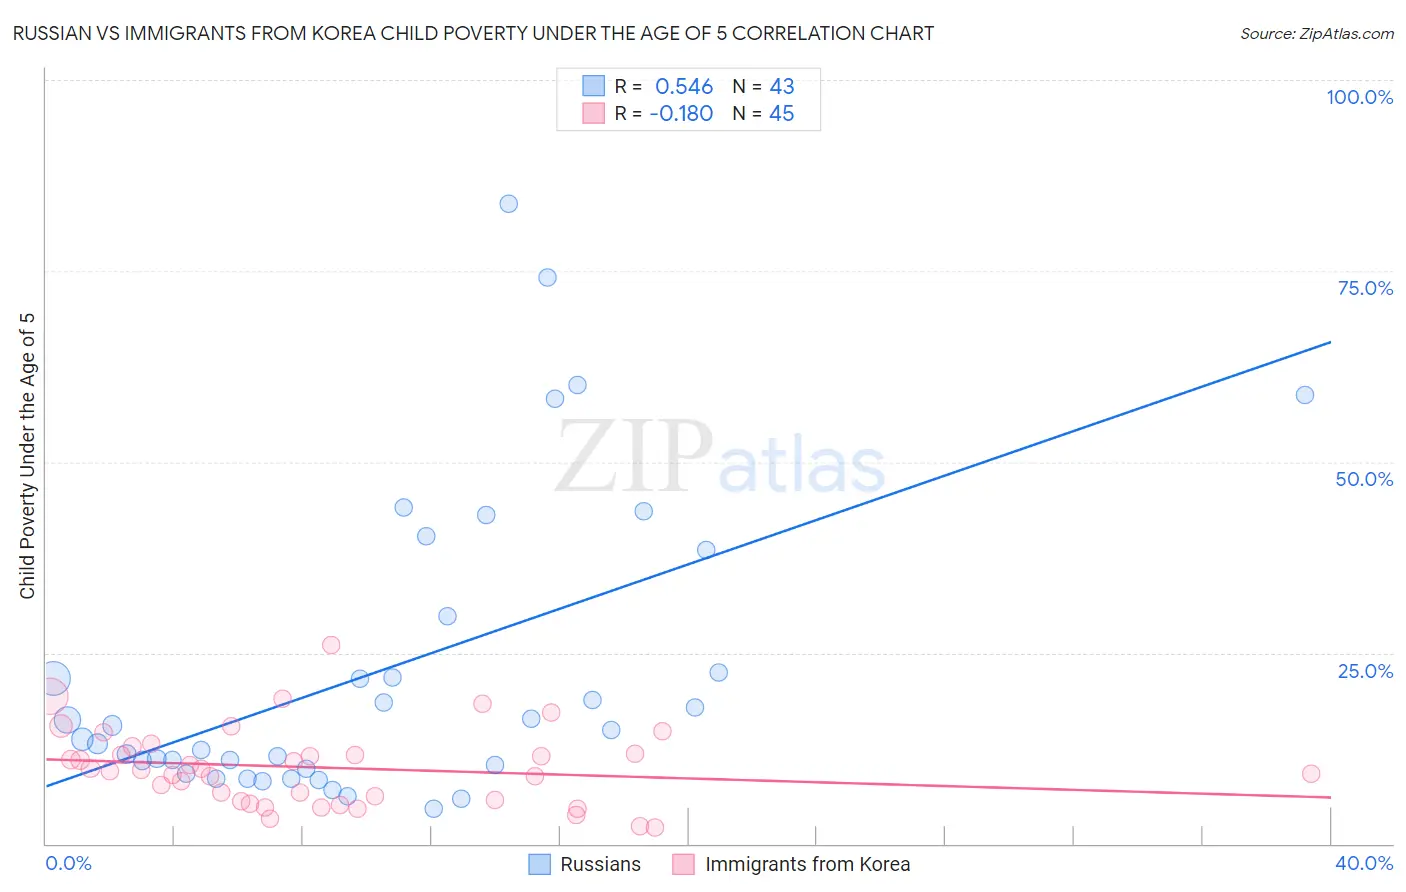 Russian vs Immigrants from Korea Child Poverty Under the Age of 5